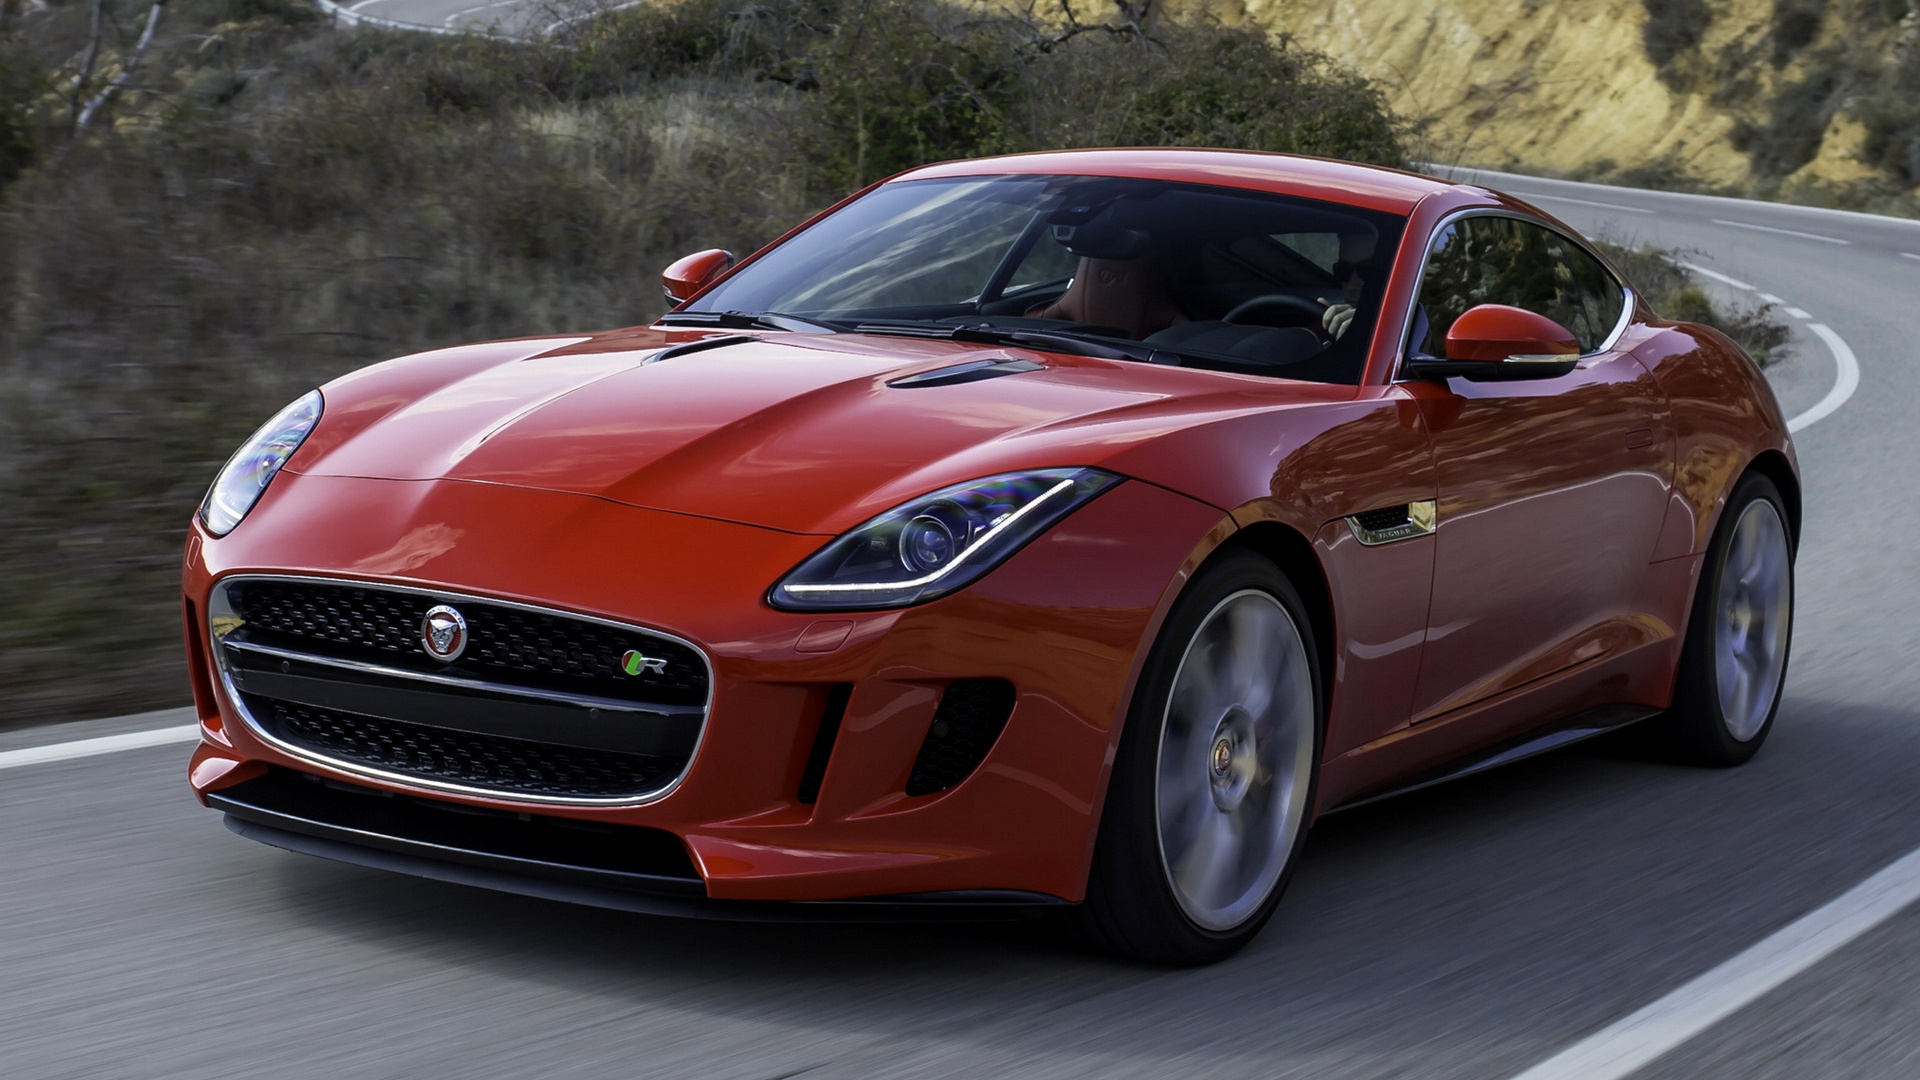 Jaguar F-Type R Coupe (2014) Wallpapers and HD Images ...